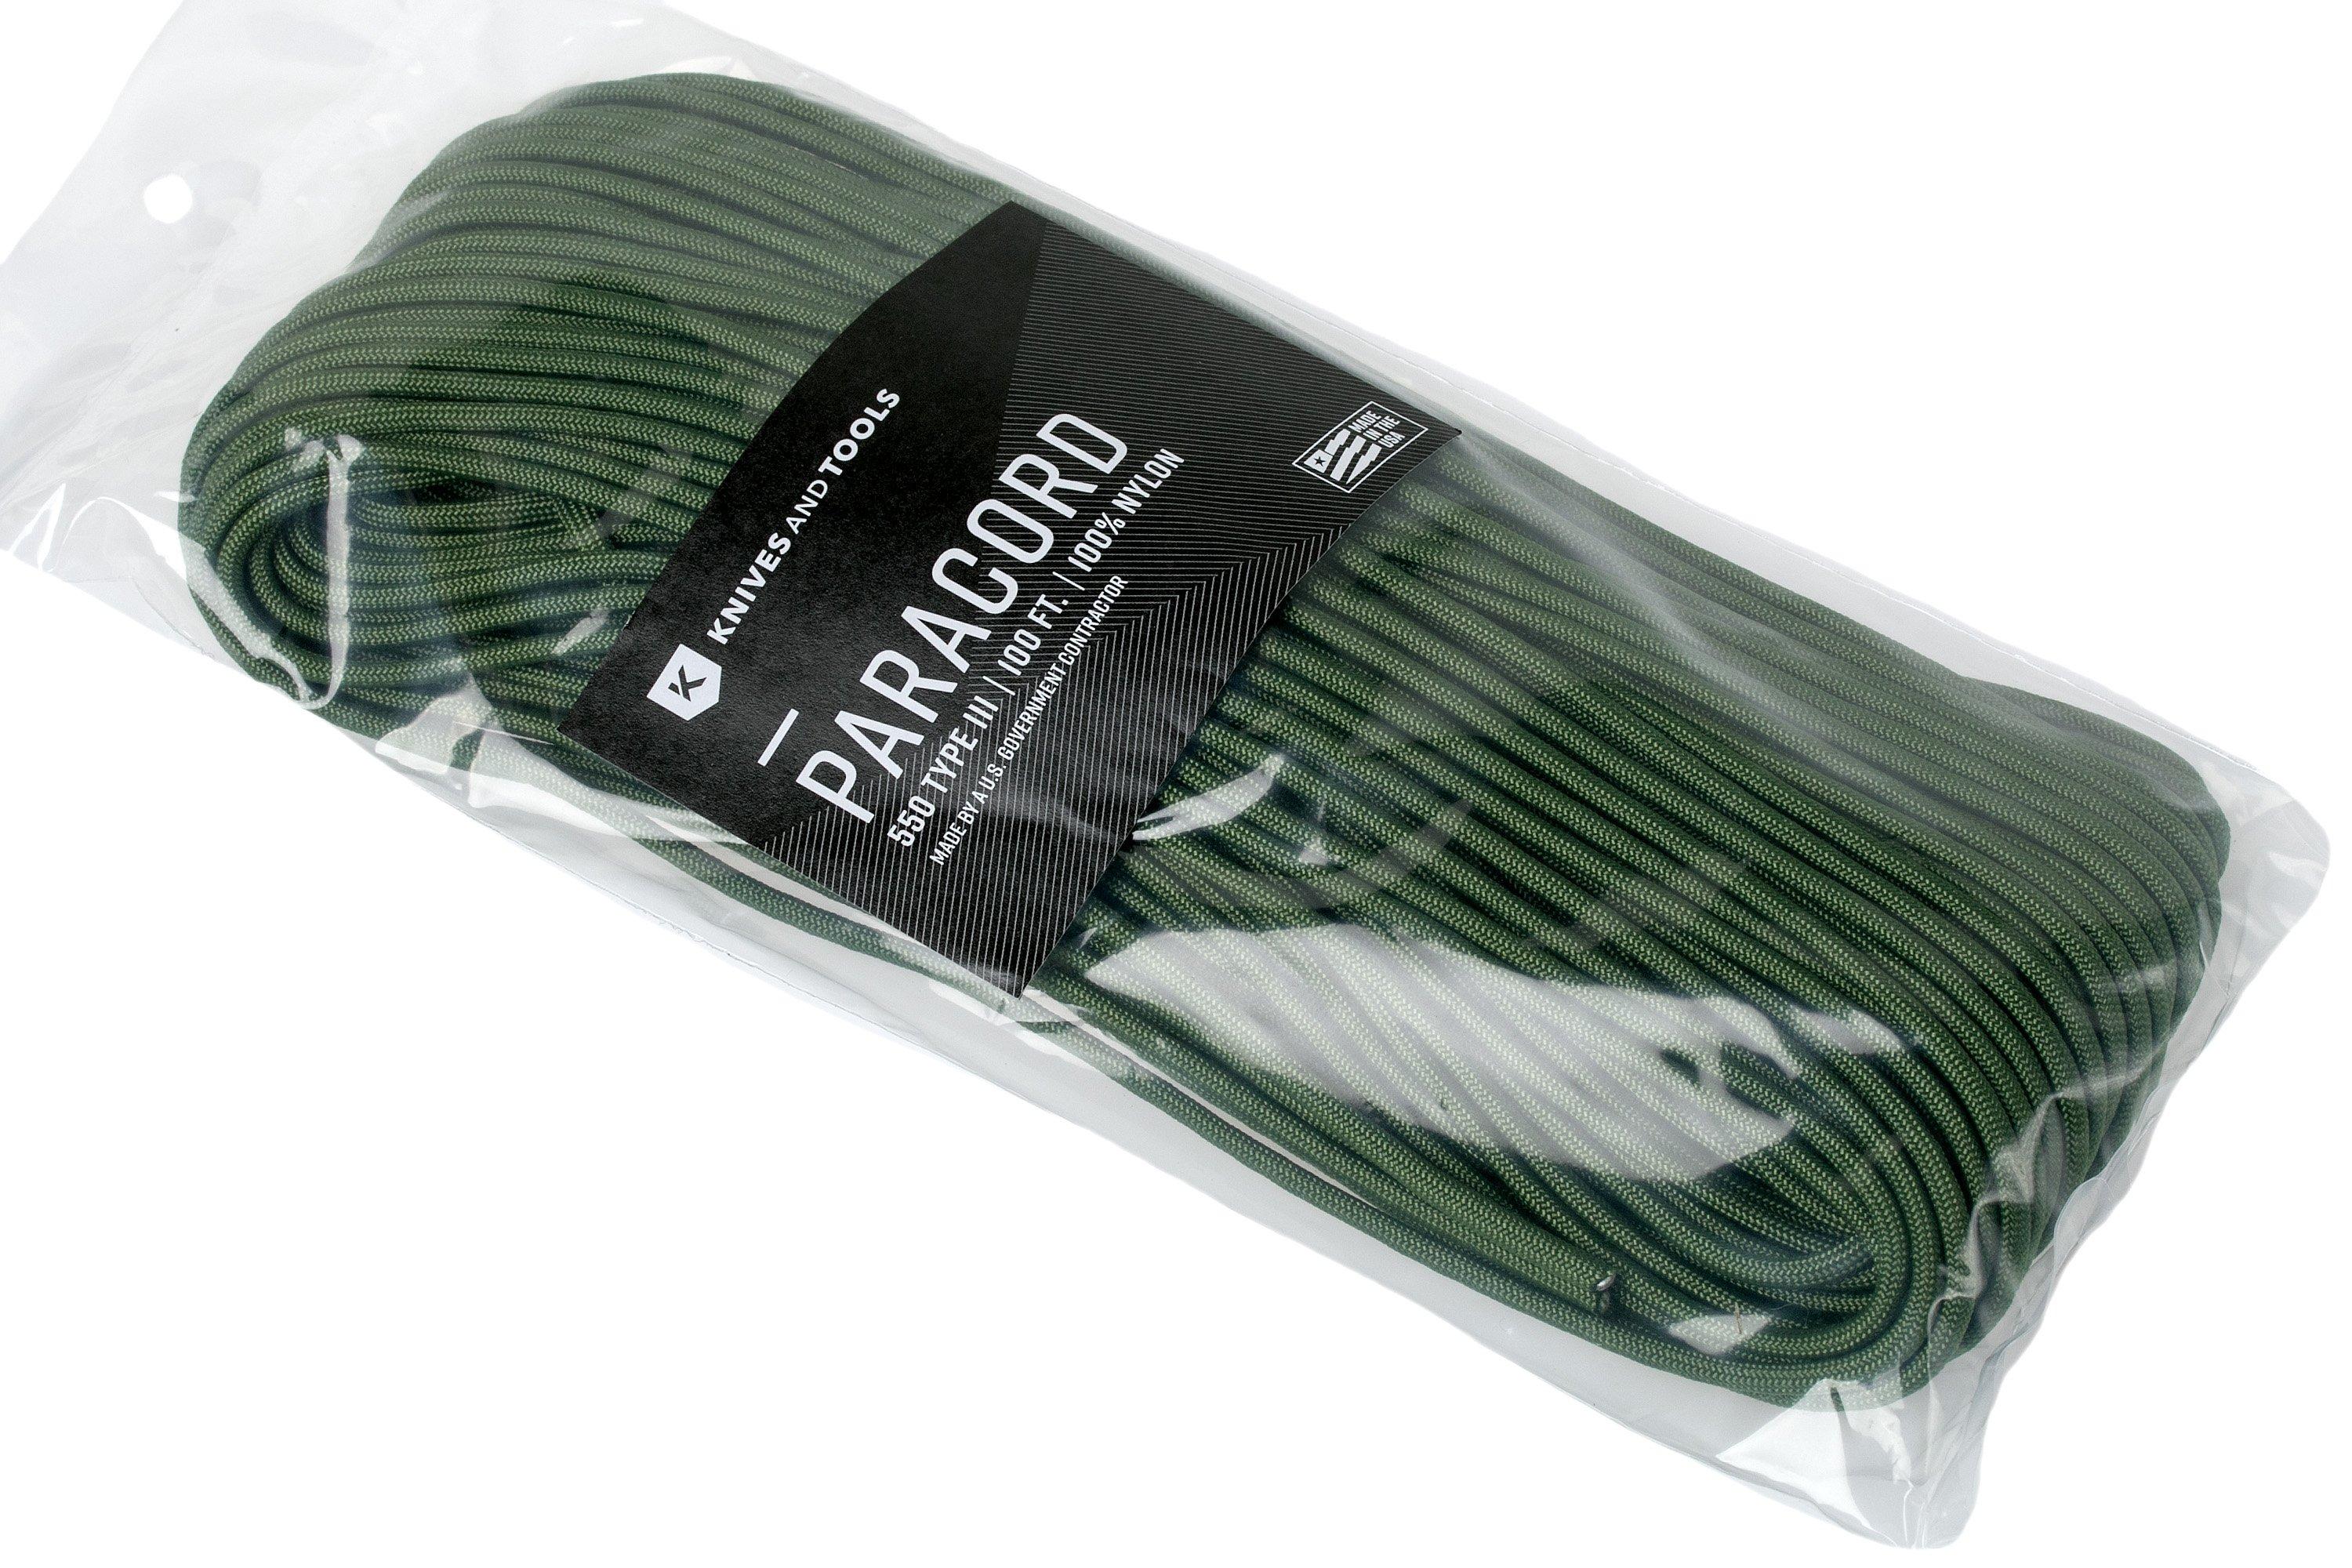 Knivesandtools 550 paracord type III, colour: fern green, 100 ft